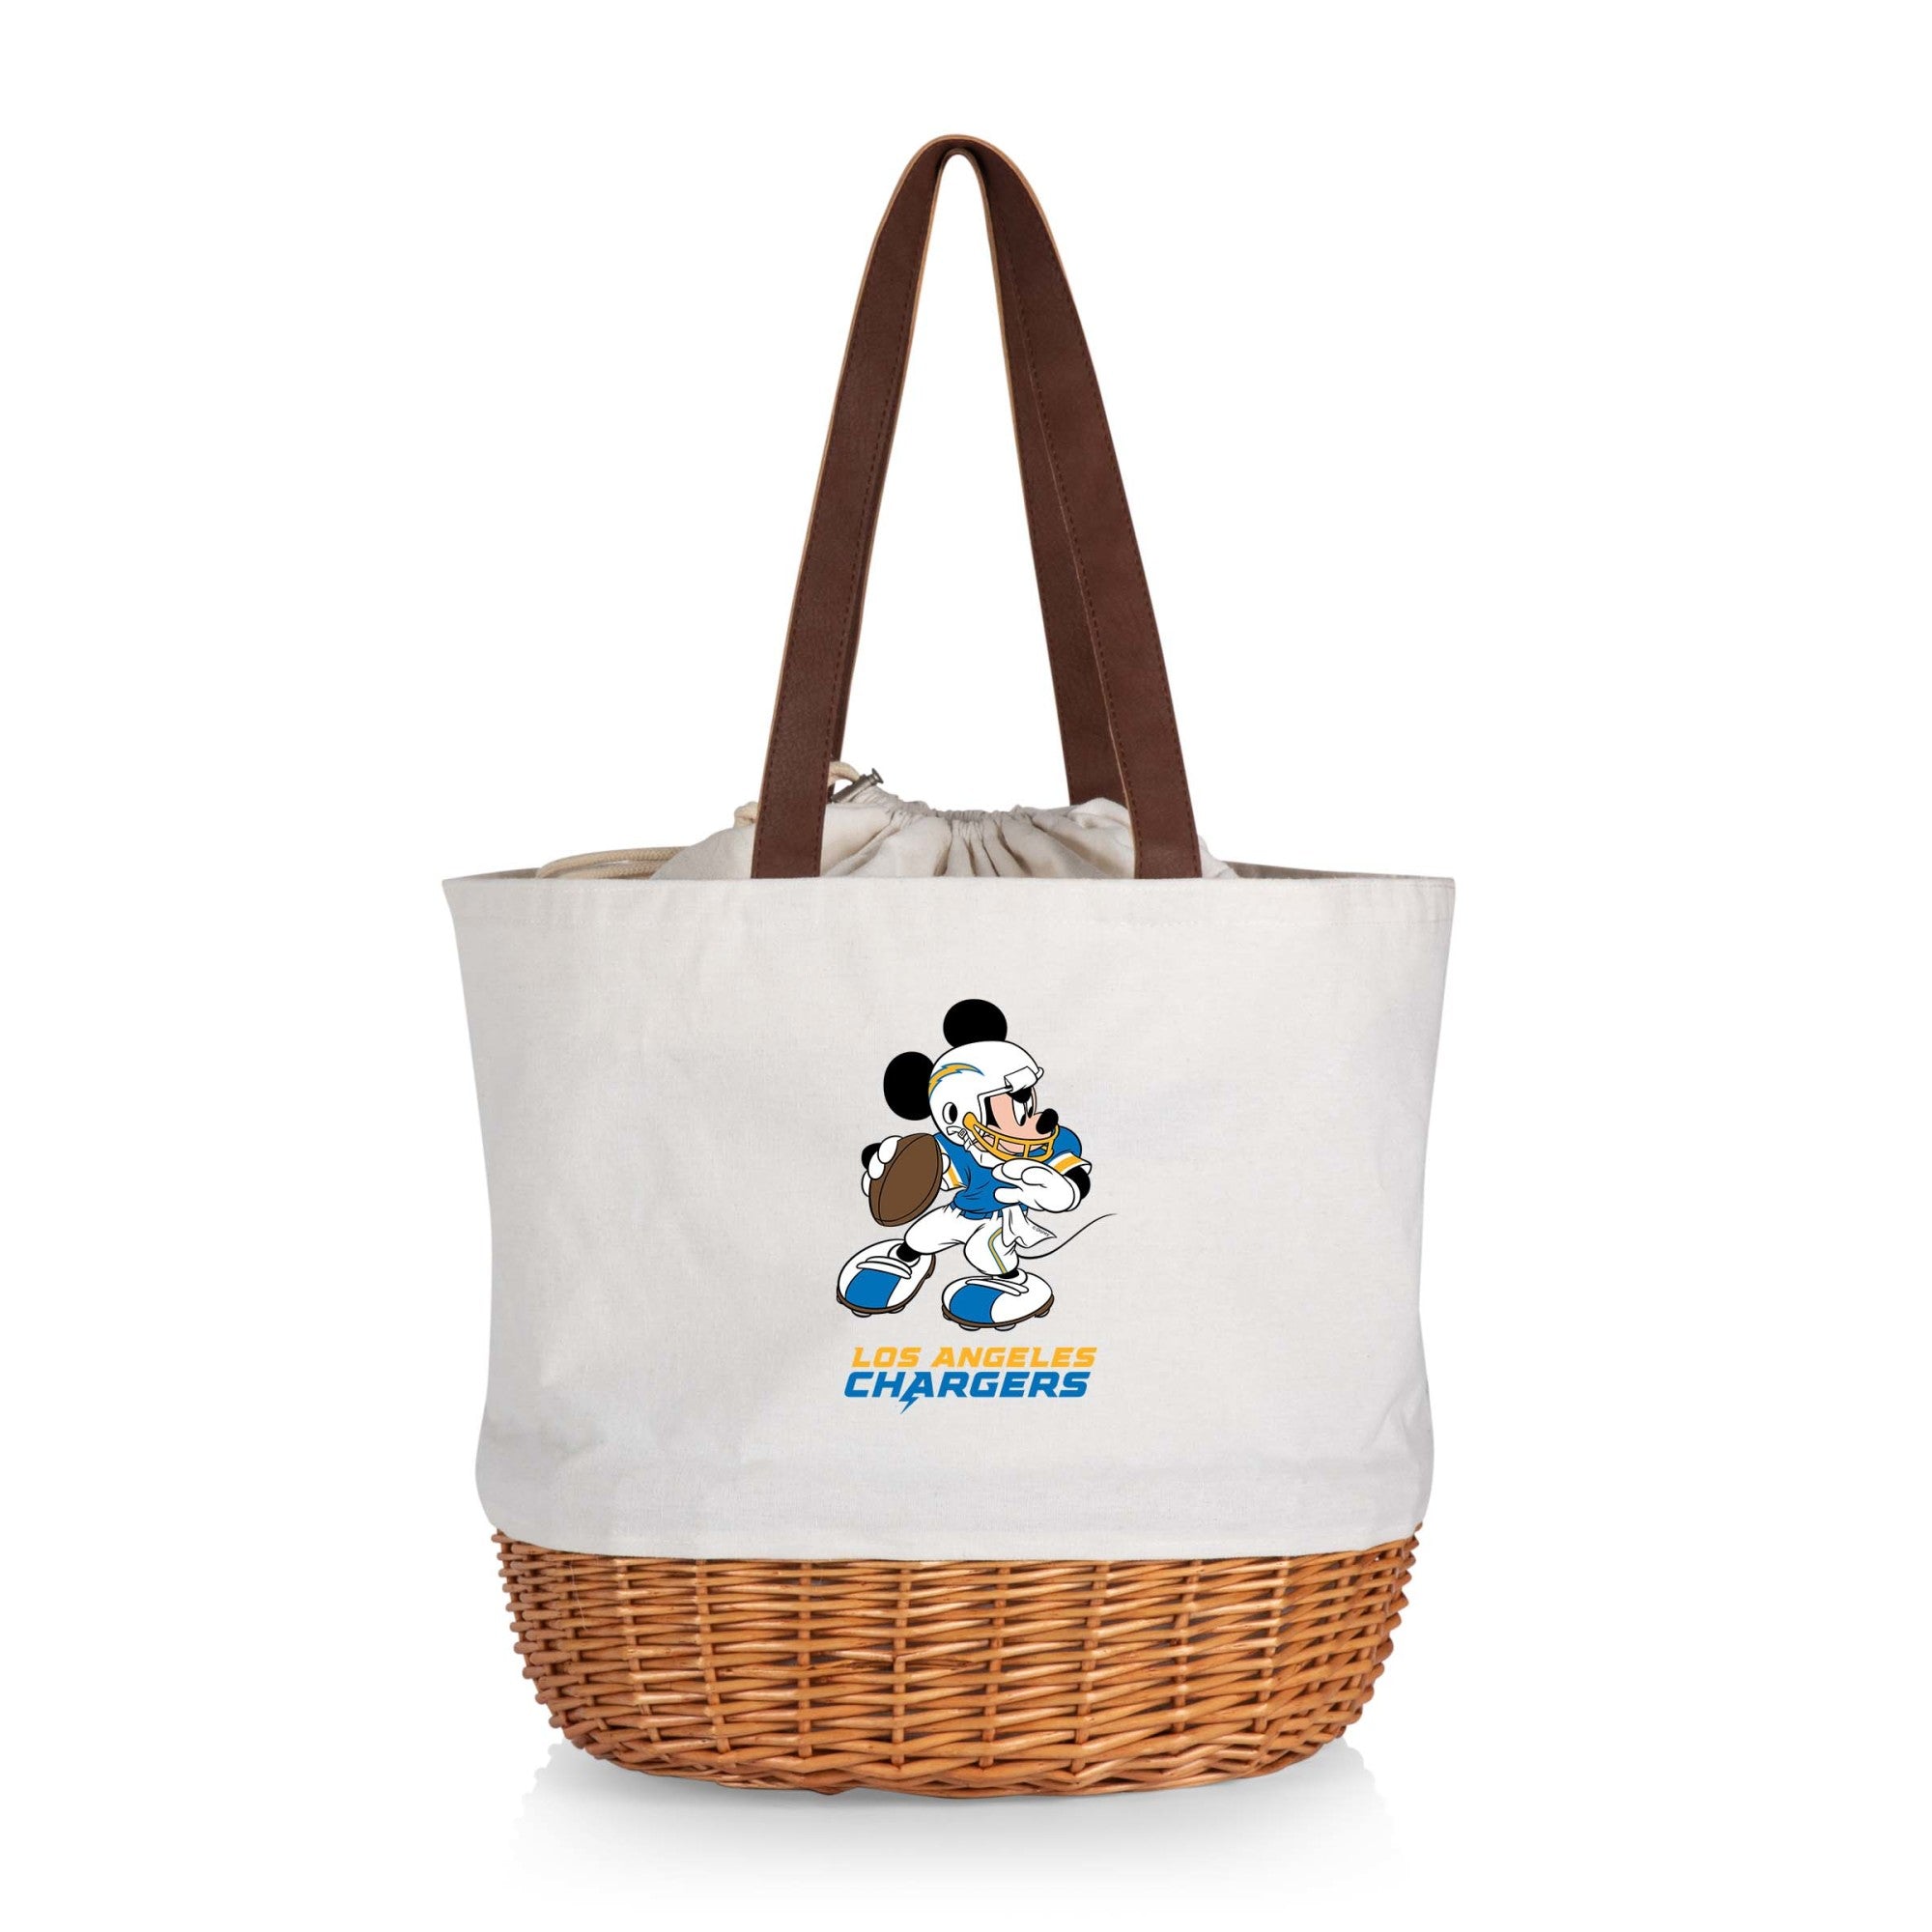 Mickey Mouse - Los Angeles Chargers - Coronado Canvas and Willow Basket Tote